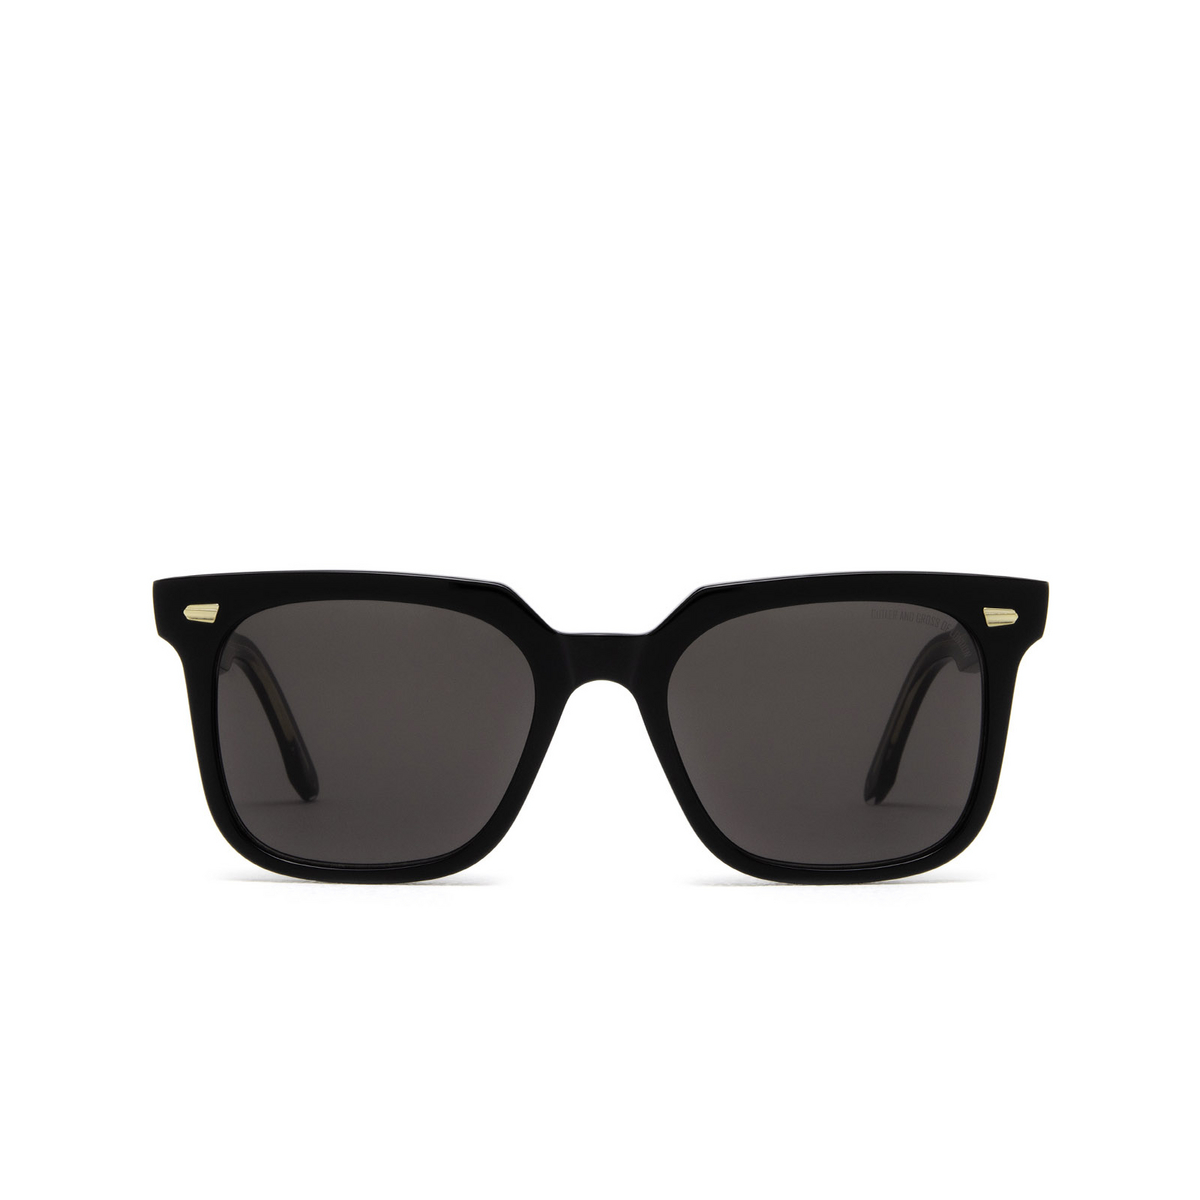 Cutler and Gross® Square Sunglasses: 1387 SUN color Black 01 - front view.